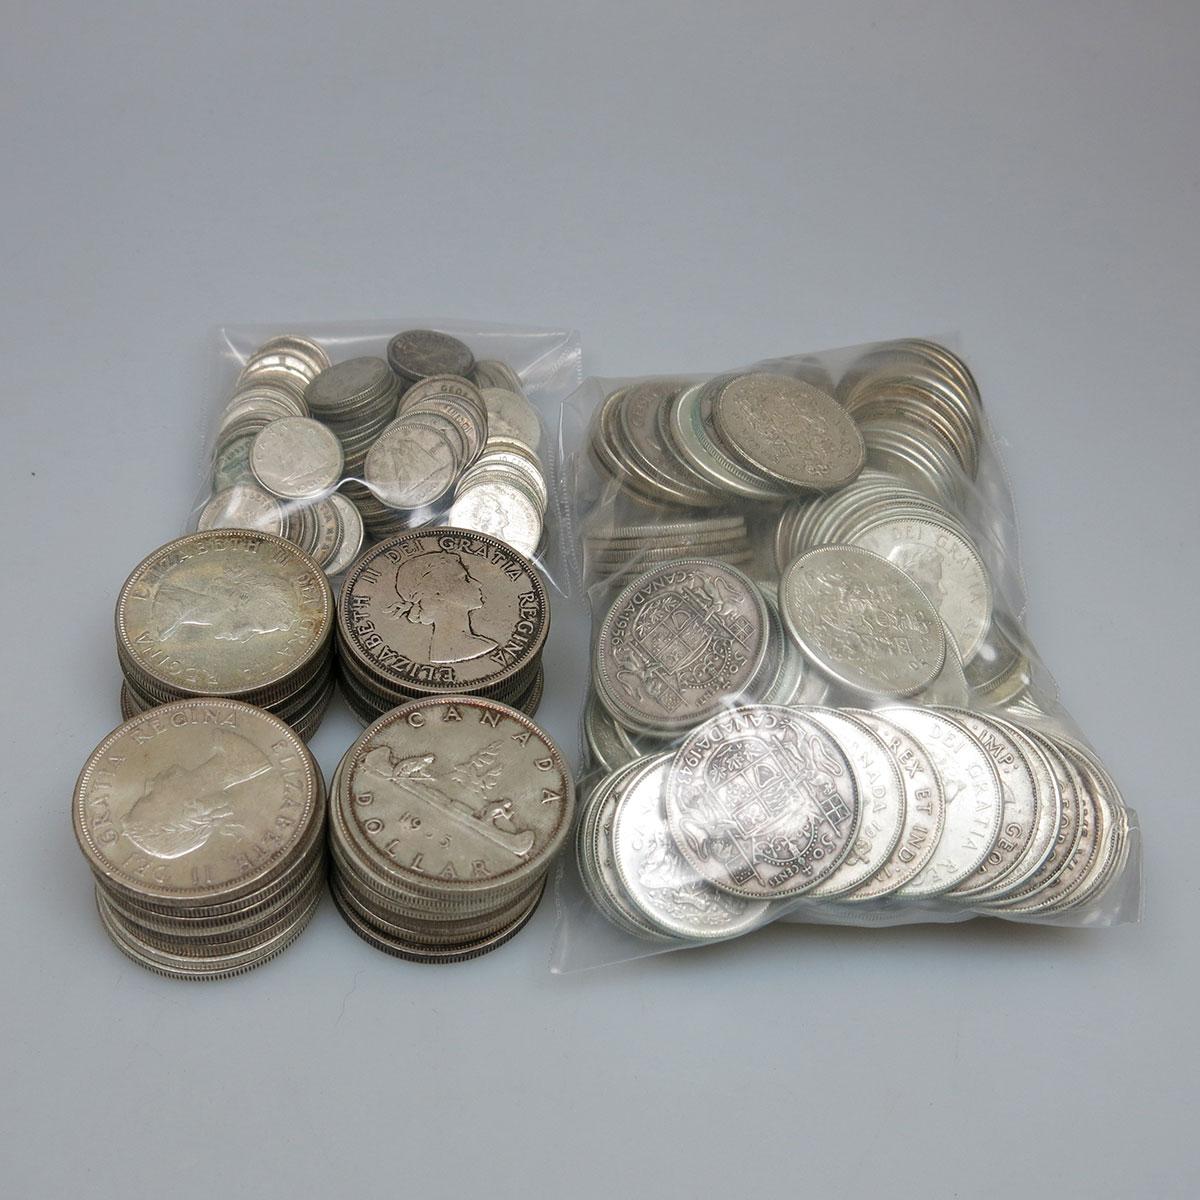 32 Canadian Silver Dollars